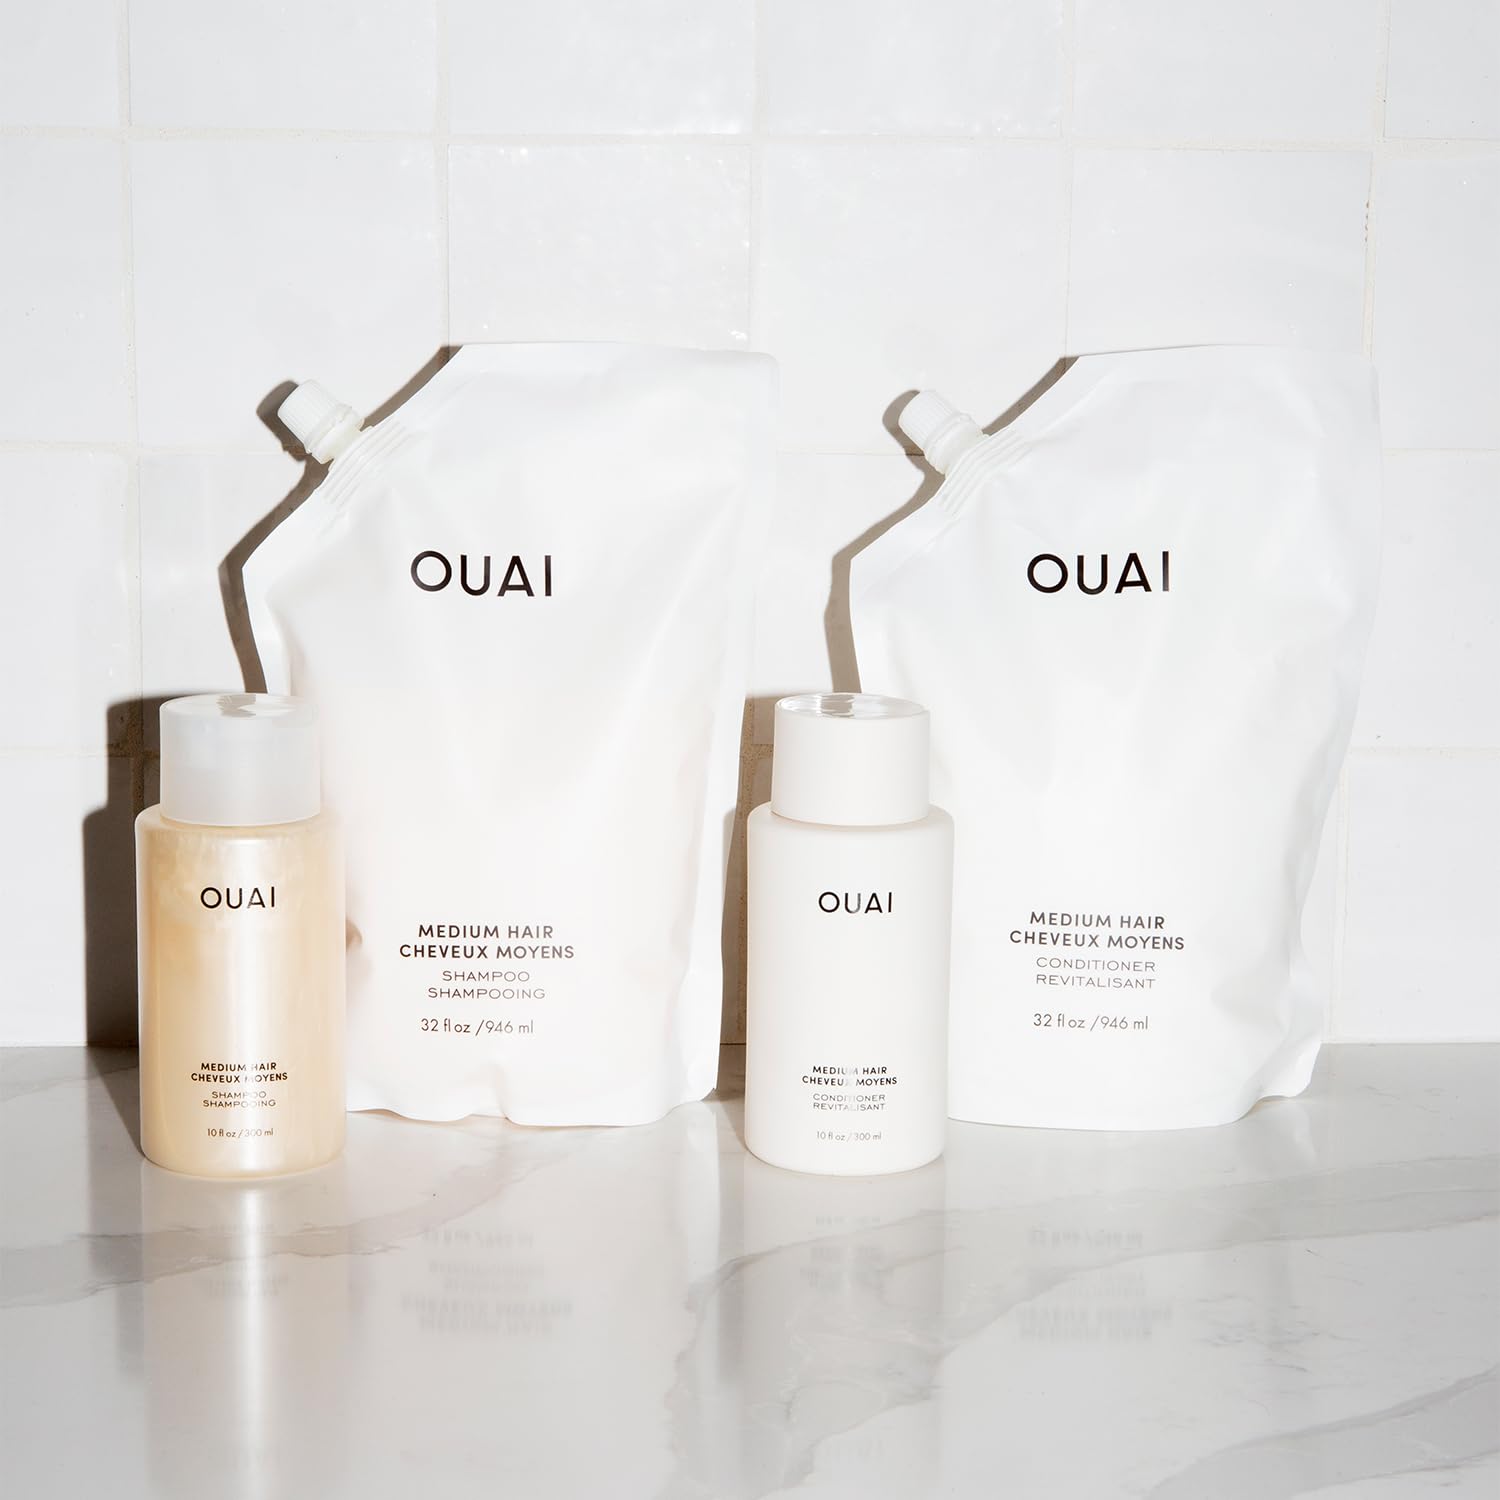 OUAI Medium Shampoo - Hydrating Shampoo with Coconut Oil, Babassu, Kumquat Extract and Keratin - Strengthens, Nourishes and Adds Shine - Paraben, Phthalate and Sulfate Free Hair Care Products - 10 oz : Beauty & Personal Care